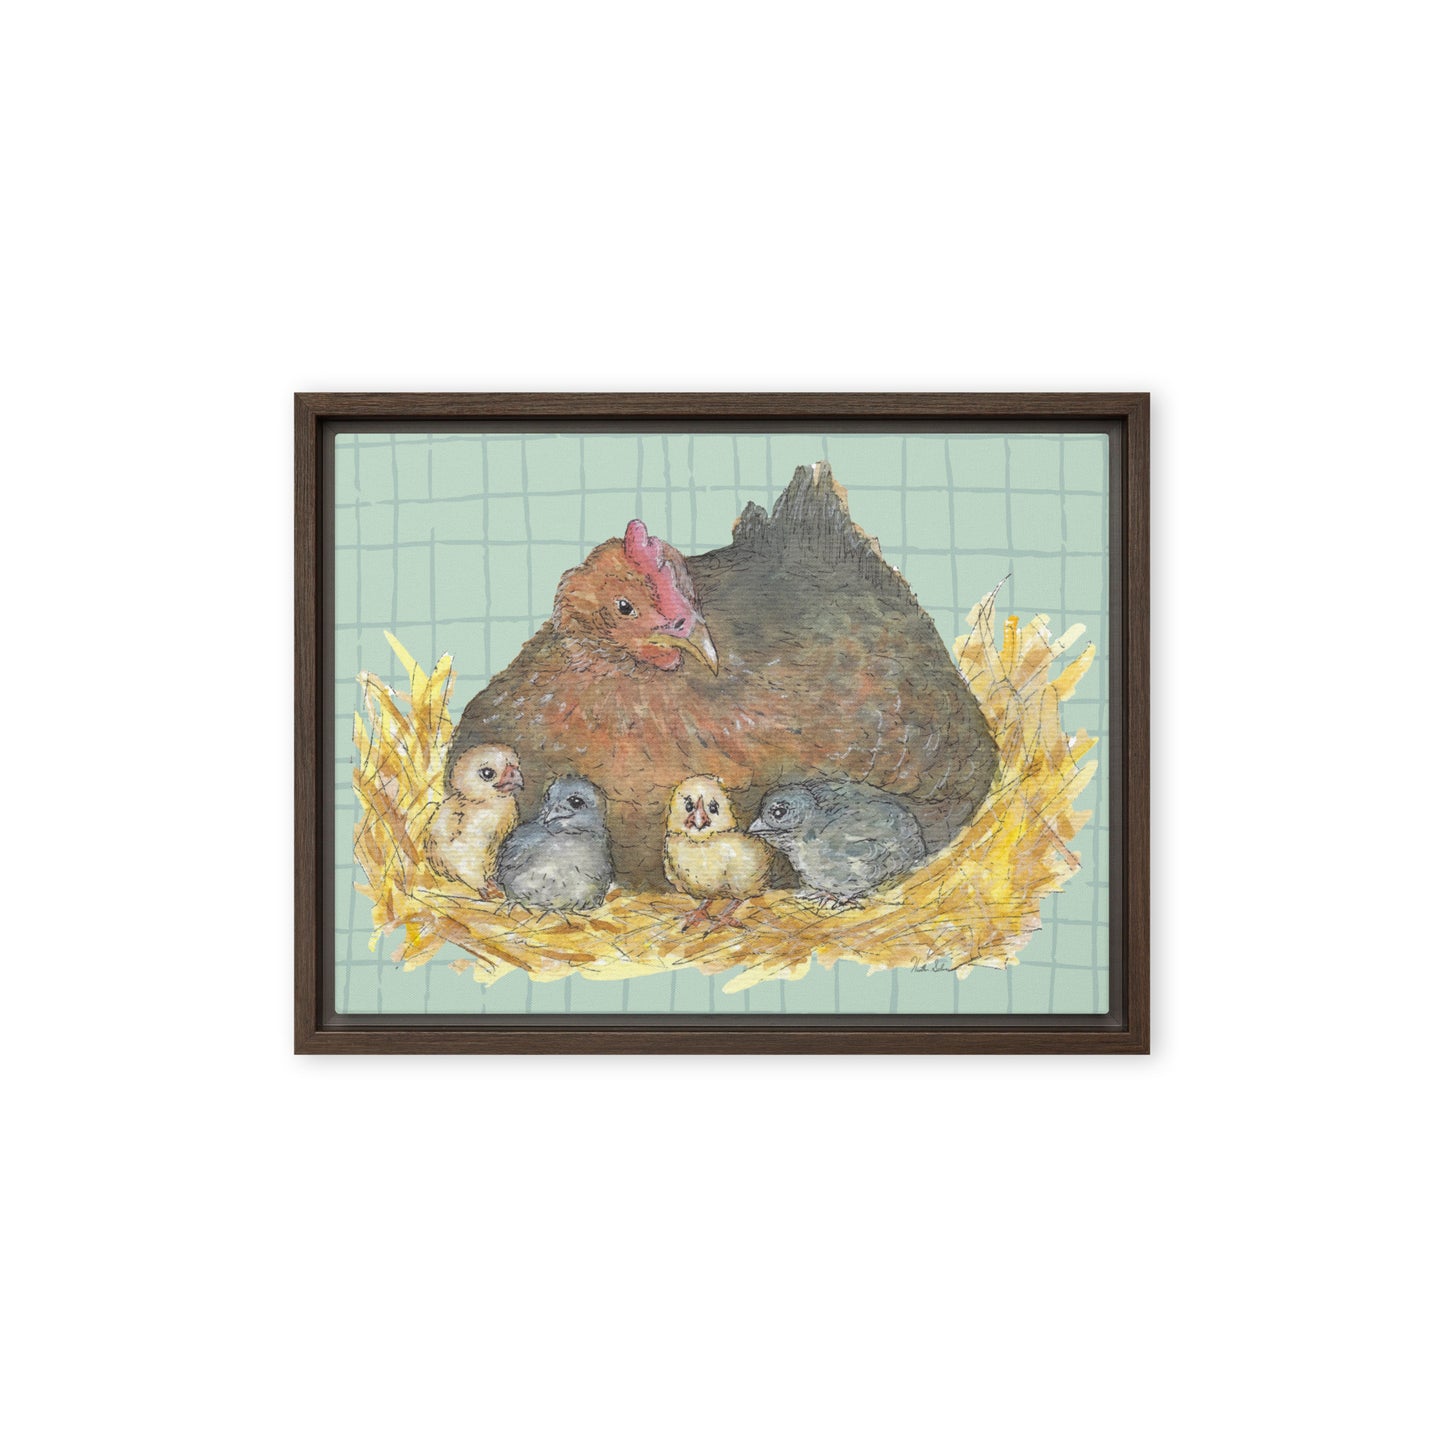 9 by 12 inch Mother Hen Floating Frame Canvas Wall Art. Heather Silver's watercolor painting, Mother Hen, with a green crosshatched background, printed on a stretched canvas and framed with a dark brown pine frame. Hanging hardware included.